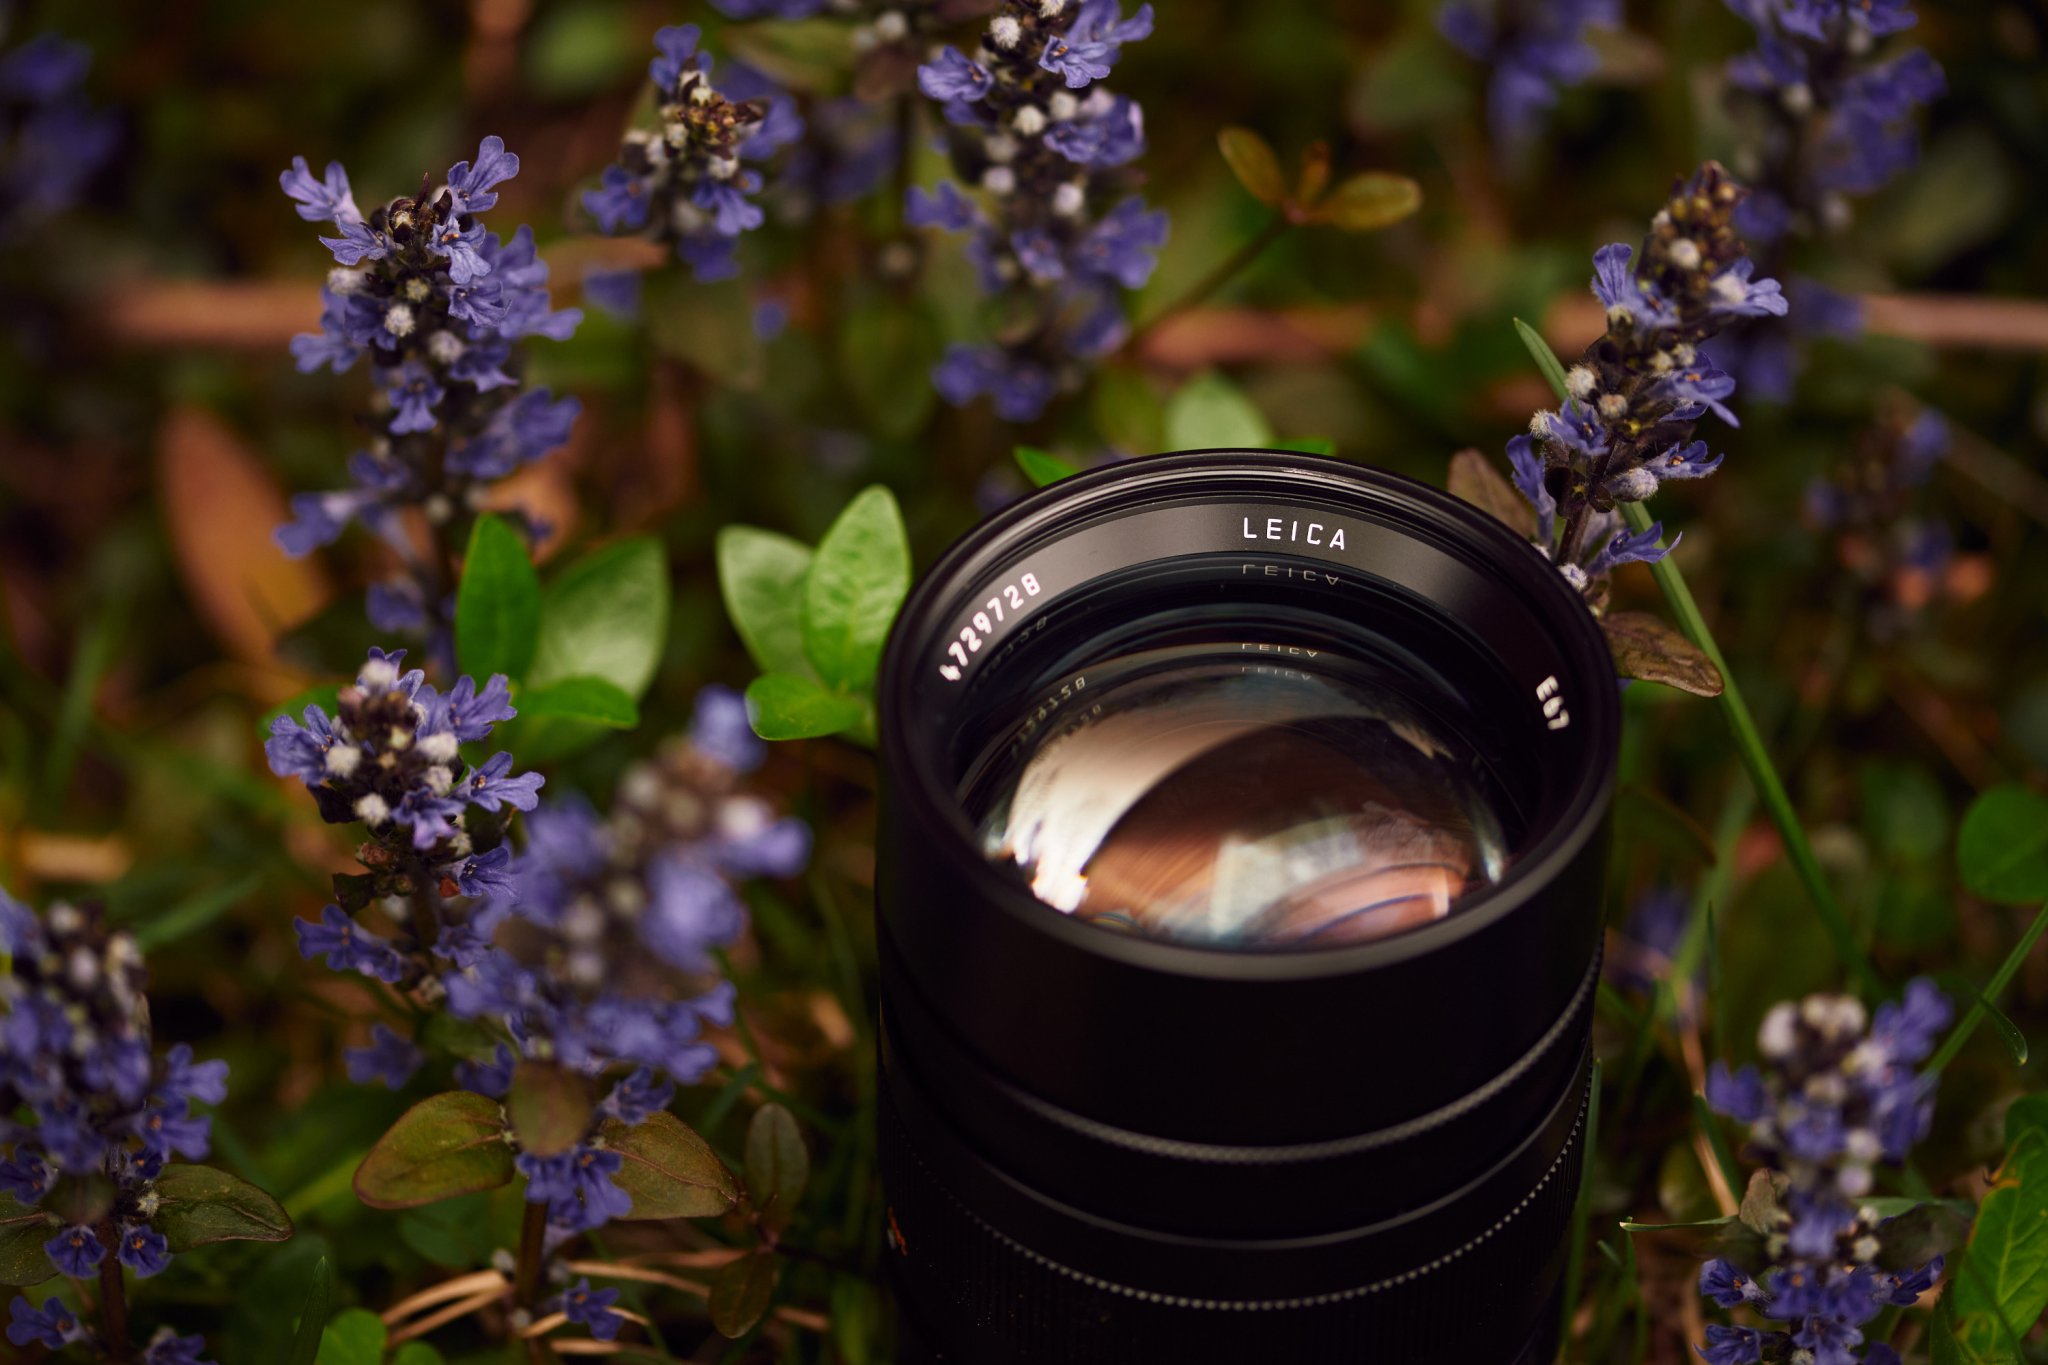 Challenging, But Worthy Slice of Focus: Leica 90mm F1.5 Summilux ASPH